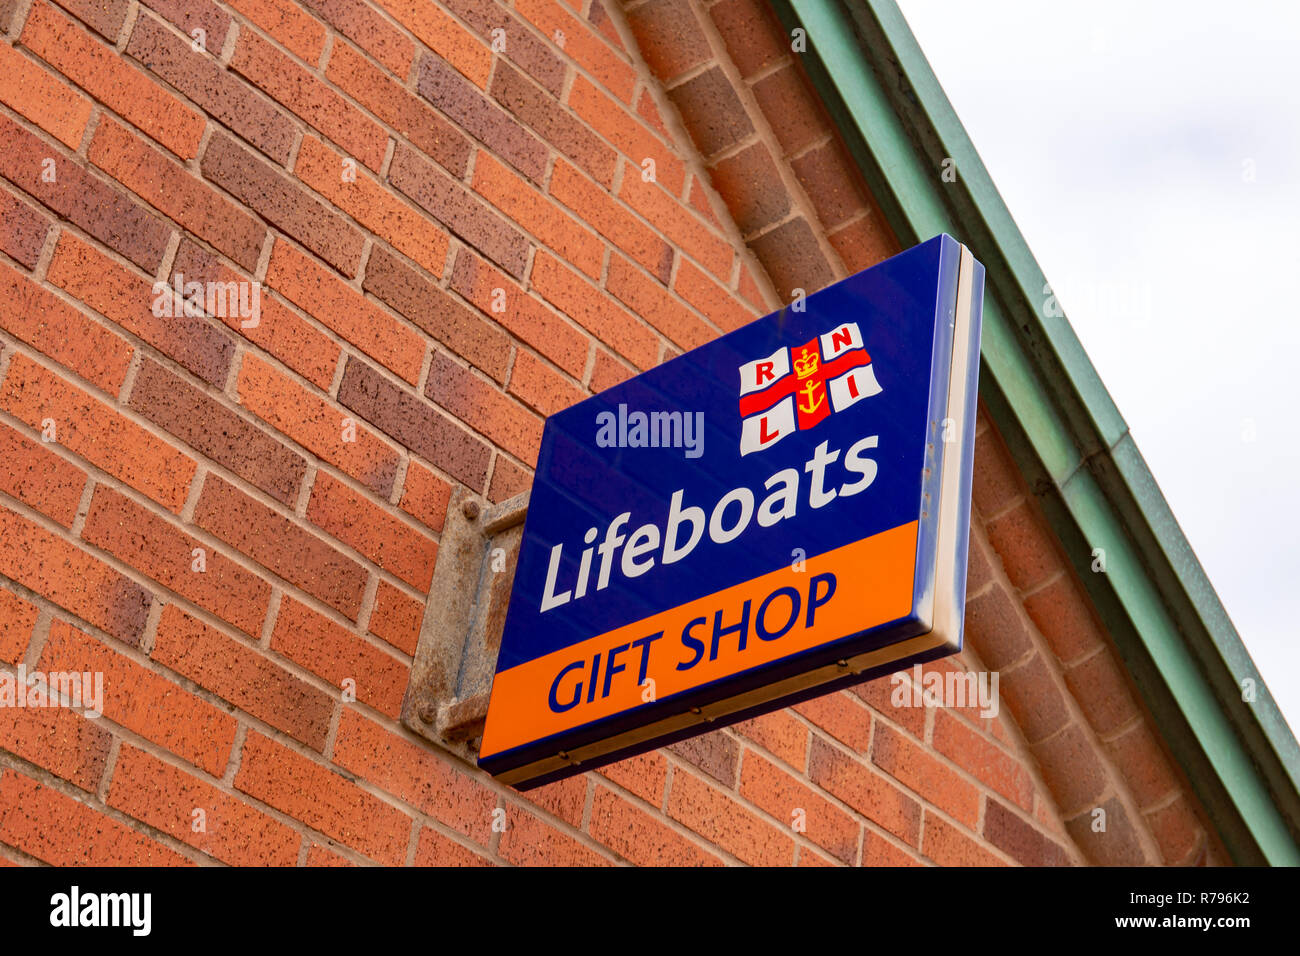 RNLI Lifeboats gift shop sign on outside wall in Blackpool Lancashire UK Stock Photo